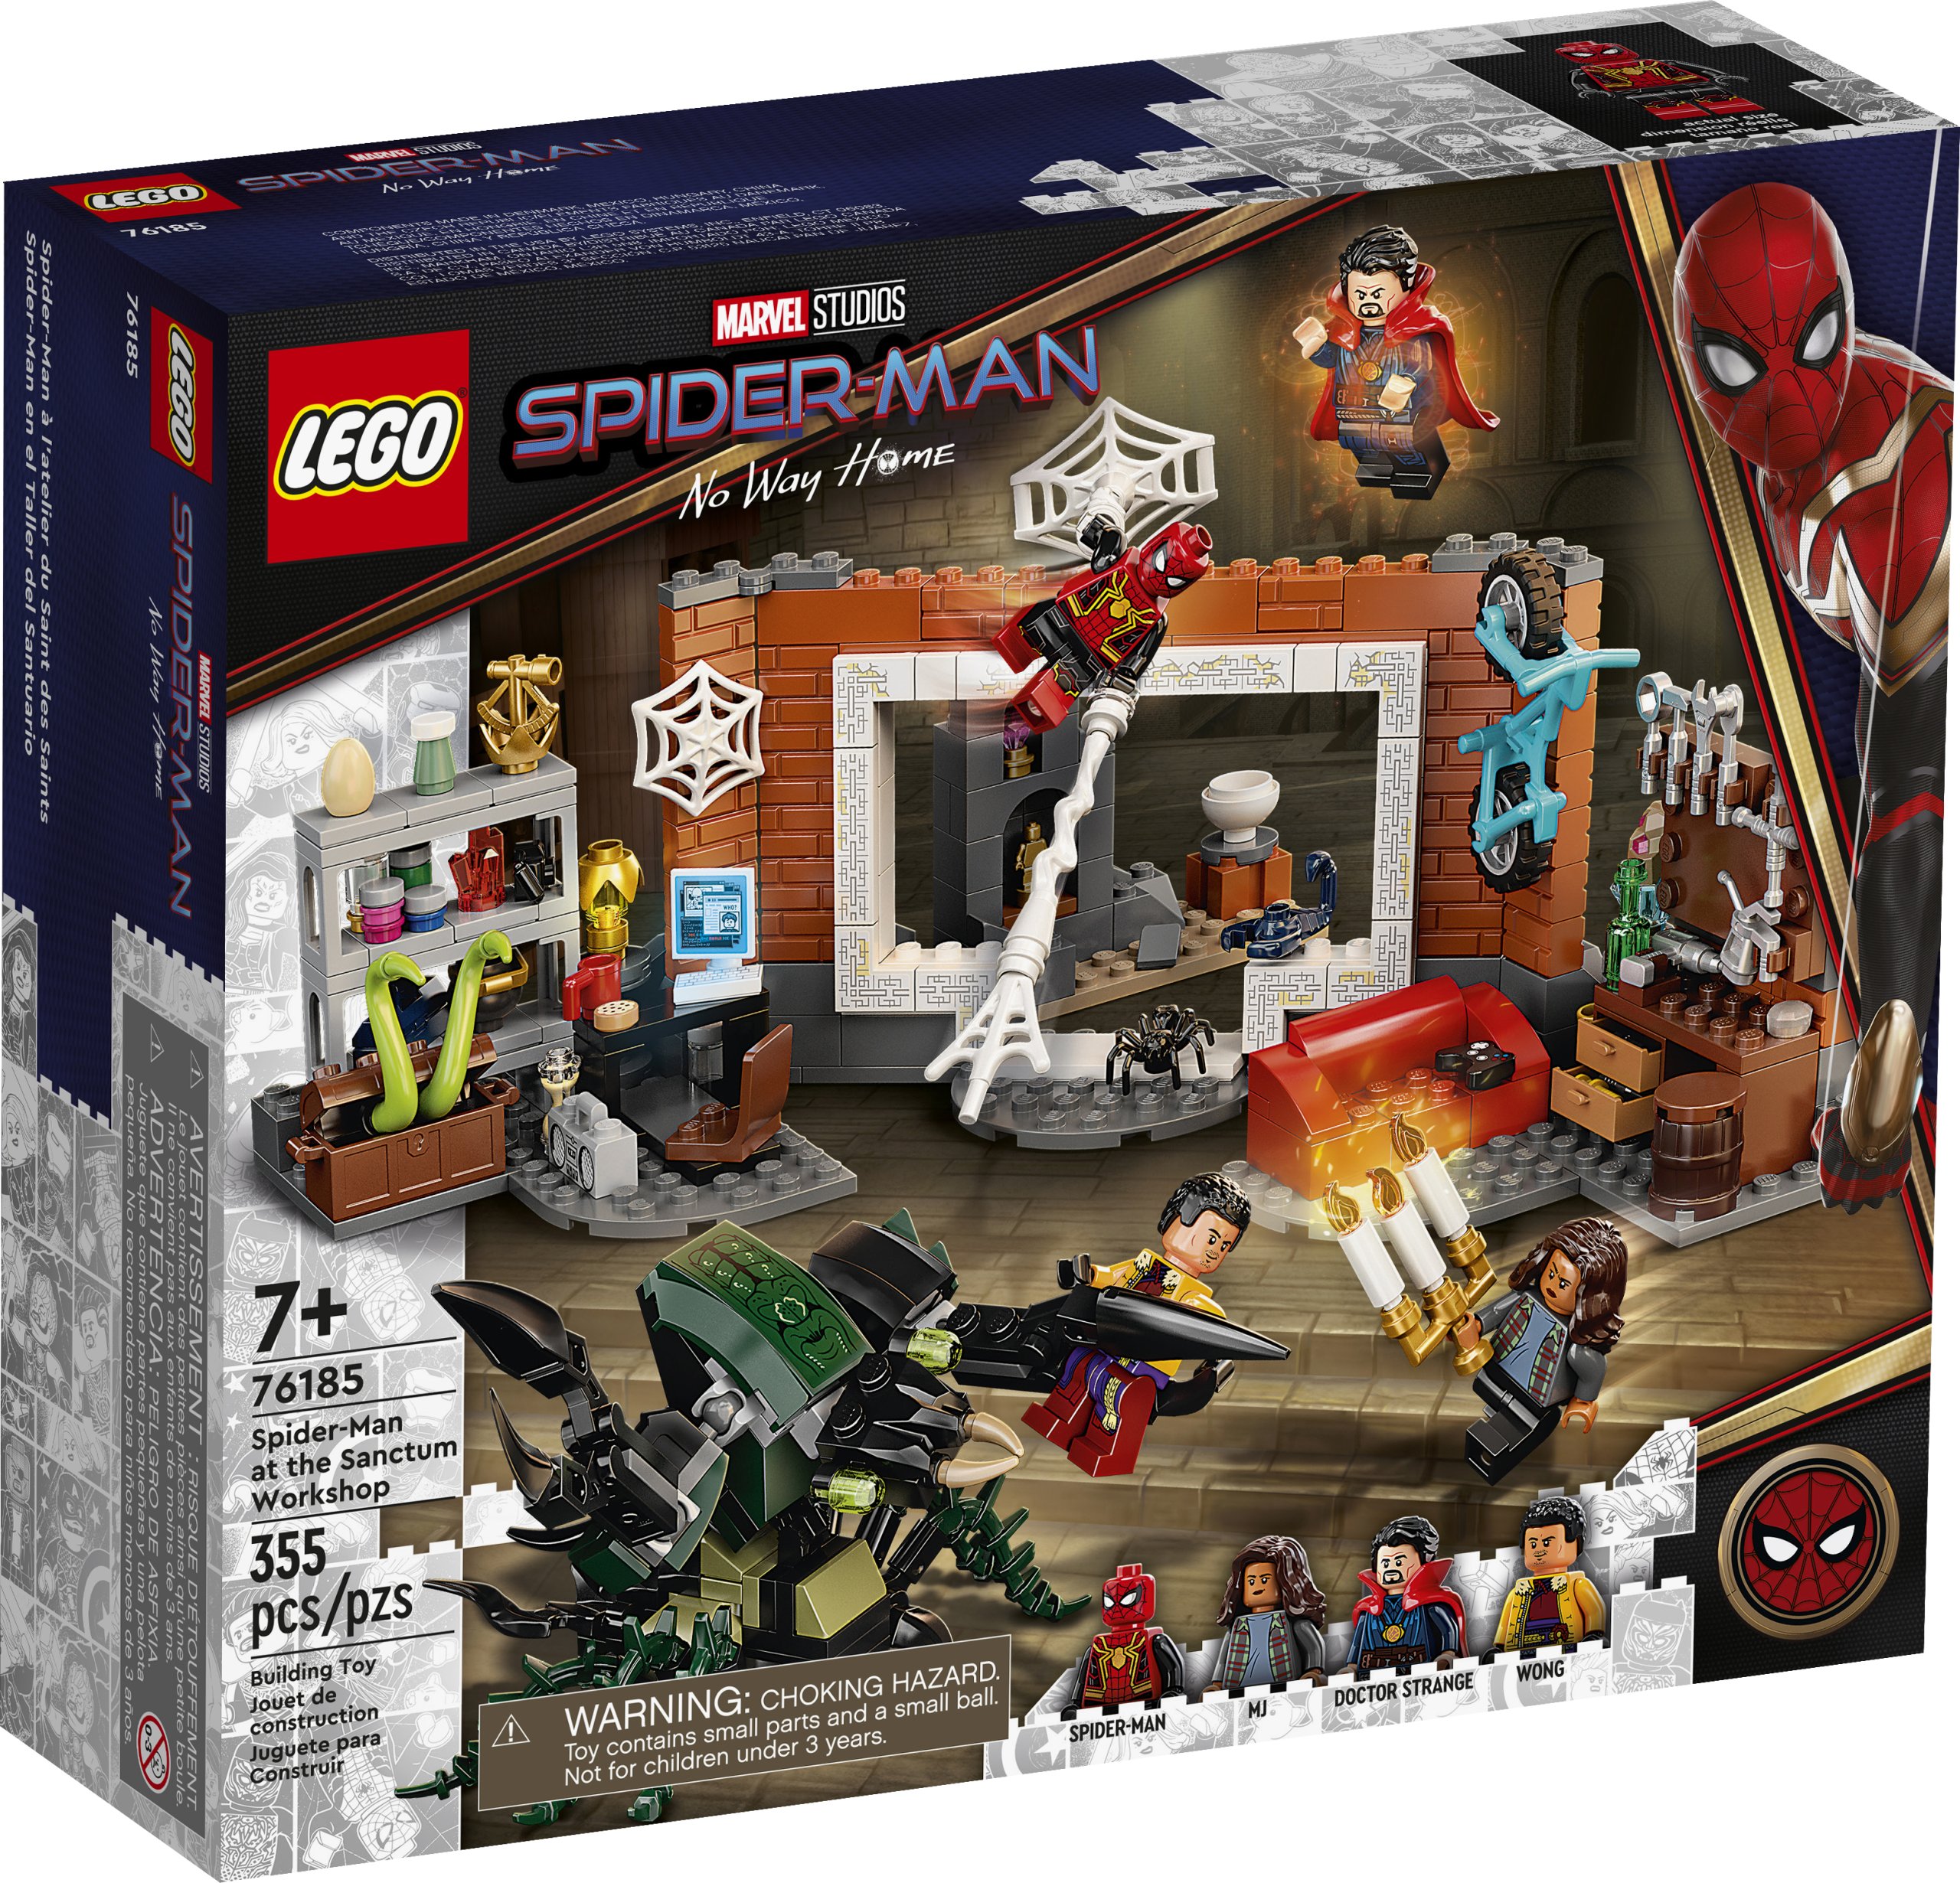 Fans of Marvel Studios’ Spider-Man: No Way Home can amaze their friends with LEGO® Marvel Spider-Man at the Sanctum Workshop (76185). With authentic details, awesome accessories and a monster bug to battle, the set inspires endless imaginative play and impressive displays. Doctor Strange’s action-packed HQ The Master of the Mystic Arts’ basement is filled with fun items to engage fans of the Marvel movies and encourage endless creative role play. There are cool tools, bicycles, a game controller, candelabra, boom box, mystical glowing stone, plus lots more magical surprises for kids to discover. The set includes 4 popular minifigures: Spider-Man, MJ, Wong – and Doctor Strange wearing the Cloak of Levitation. Play possibilities are expanded further with a buildable, giant bug monster with gripping claws. For more building fun, the free LEGO Building Instructions app includes digital Instructions PLUS, which allows kids to zoom, rotate and visualize their playset as they build. Marvel fans can amaze their friends with LEGO® Marvel Spider-Man at the Sanctum Workshop (76185), featuring the Super Hero sorcerer’s activity-packed basement. Includes 4 minifigures: Spider-Man, MJ, Wong and Doctor Strange (with a fabric cloak). There is an amazing assortment of accessories to inspire imaginative role play, including cool tools, bicycles, a game controller, candelabra, boom box and a mystical glowing stone. A buildable, giant bug monster with gripping claws expands the play possibilities even further. An ideal birthday, holiday or just-because gift for Marvel movie fans aged 7 and up that will be admired by all who see it. Doctor Strange’s fun-filled, magical basement measures over 3 in. (9 cm) high, 8 in. (22 cm) wide and 8 in. (22 cm) deep and combines easily with other LEGO® Marvel sets. For more building fun, the free LEGO® Building Instructions app includes digital Instructions PLUS, which lets kids zoom, rotate and visualize their playset as they build. All LEGO® Marvel playsets are cool and collectible and give kids the chance to relive favorite Super Hero movie moments and create imaginative stories of their own. LEGO® components satisfy stringent industry standards to ensure they are consistent, compatible and connect and pull apart correctly every time – it’s been that way since 1958. LEGO® components are dropped, heated, crushed, twisted and analyzed to make sure they fulfill rigorous global safety standards.